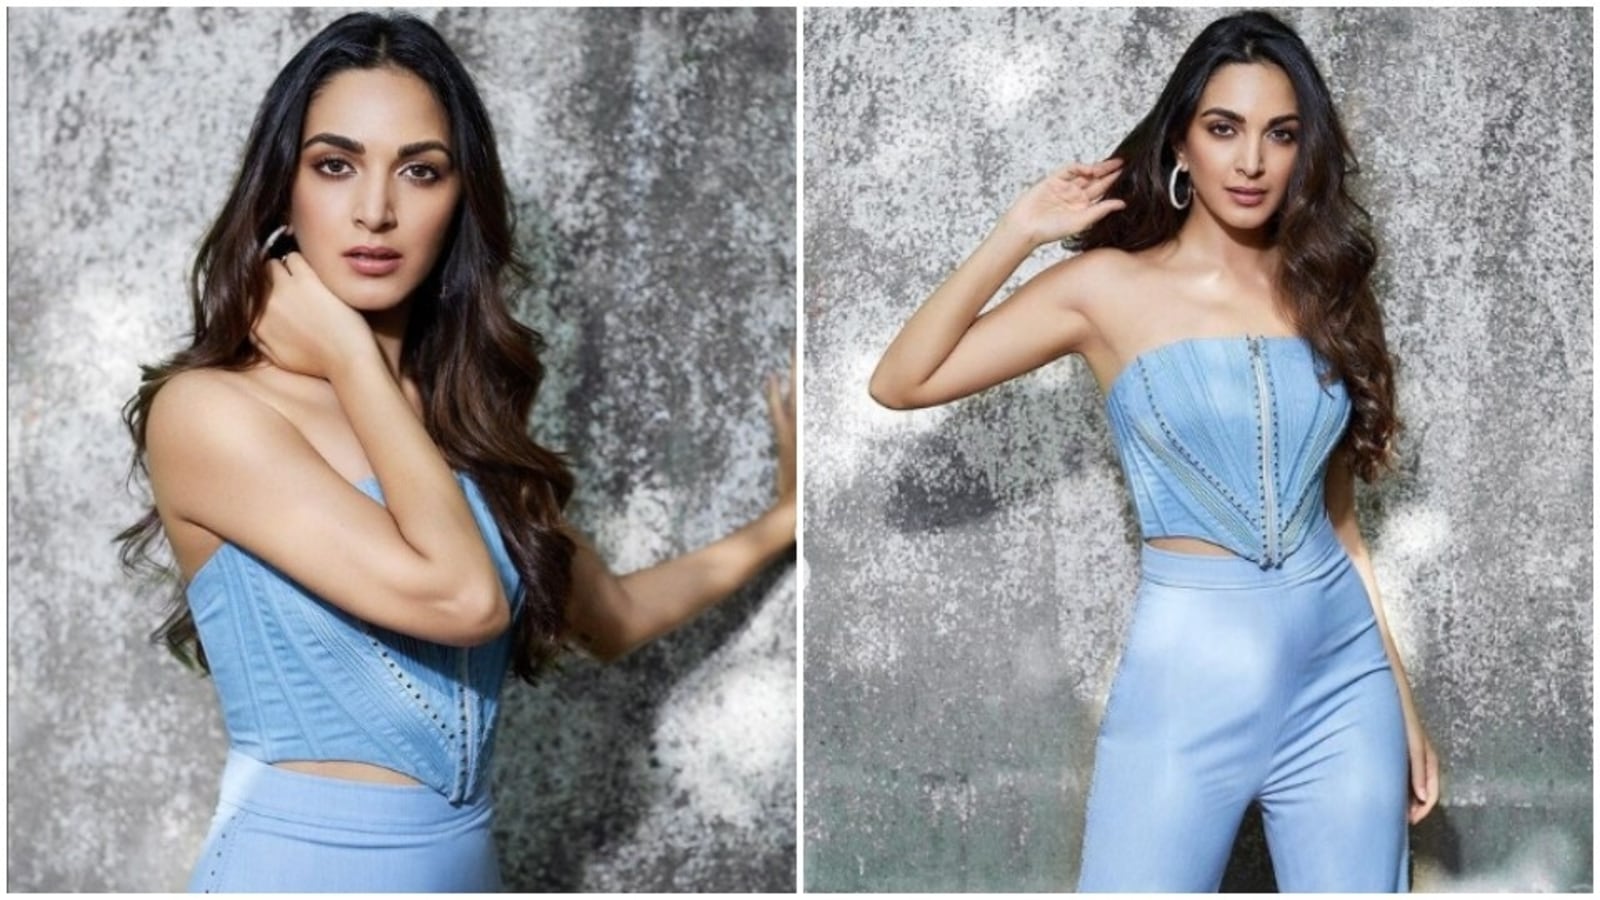 Kiara Advani’s pastel blue co-ord set is perfect for a summer day out